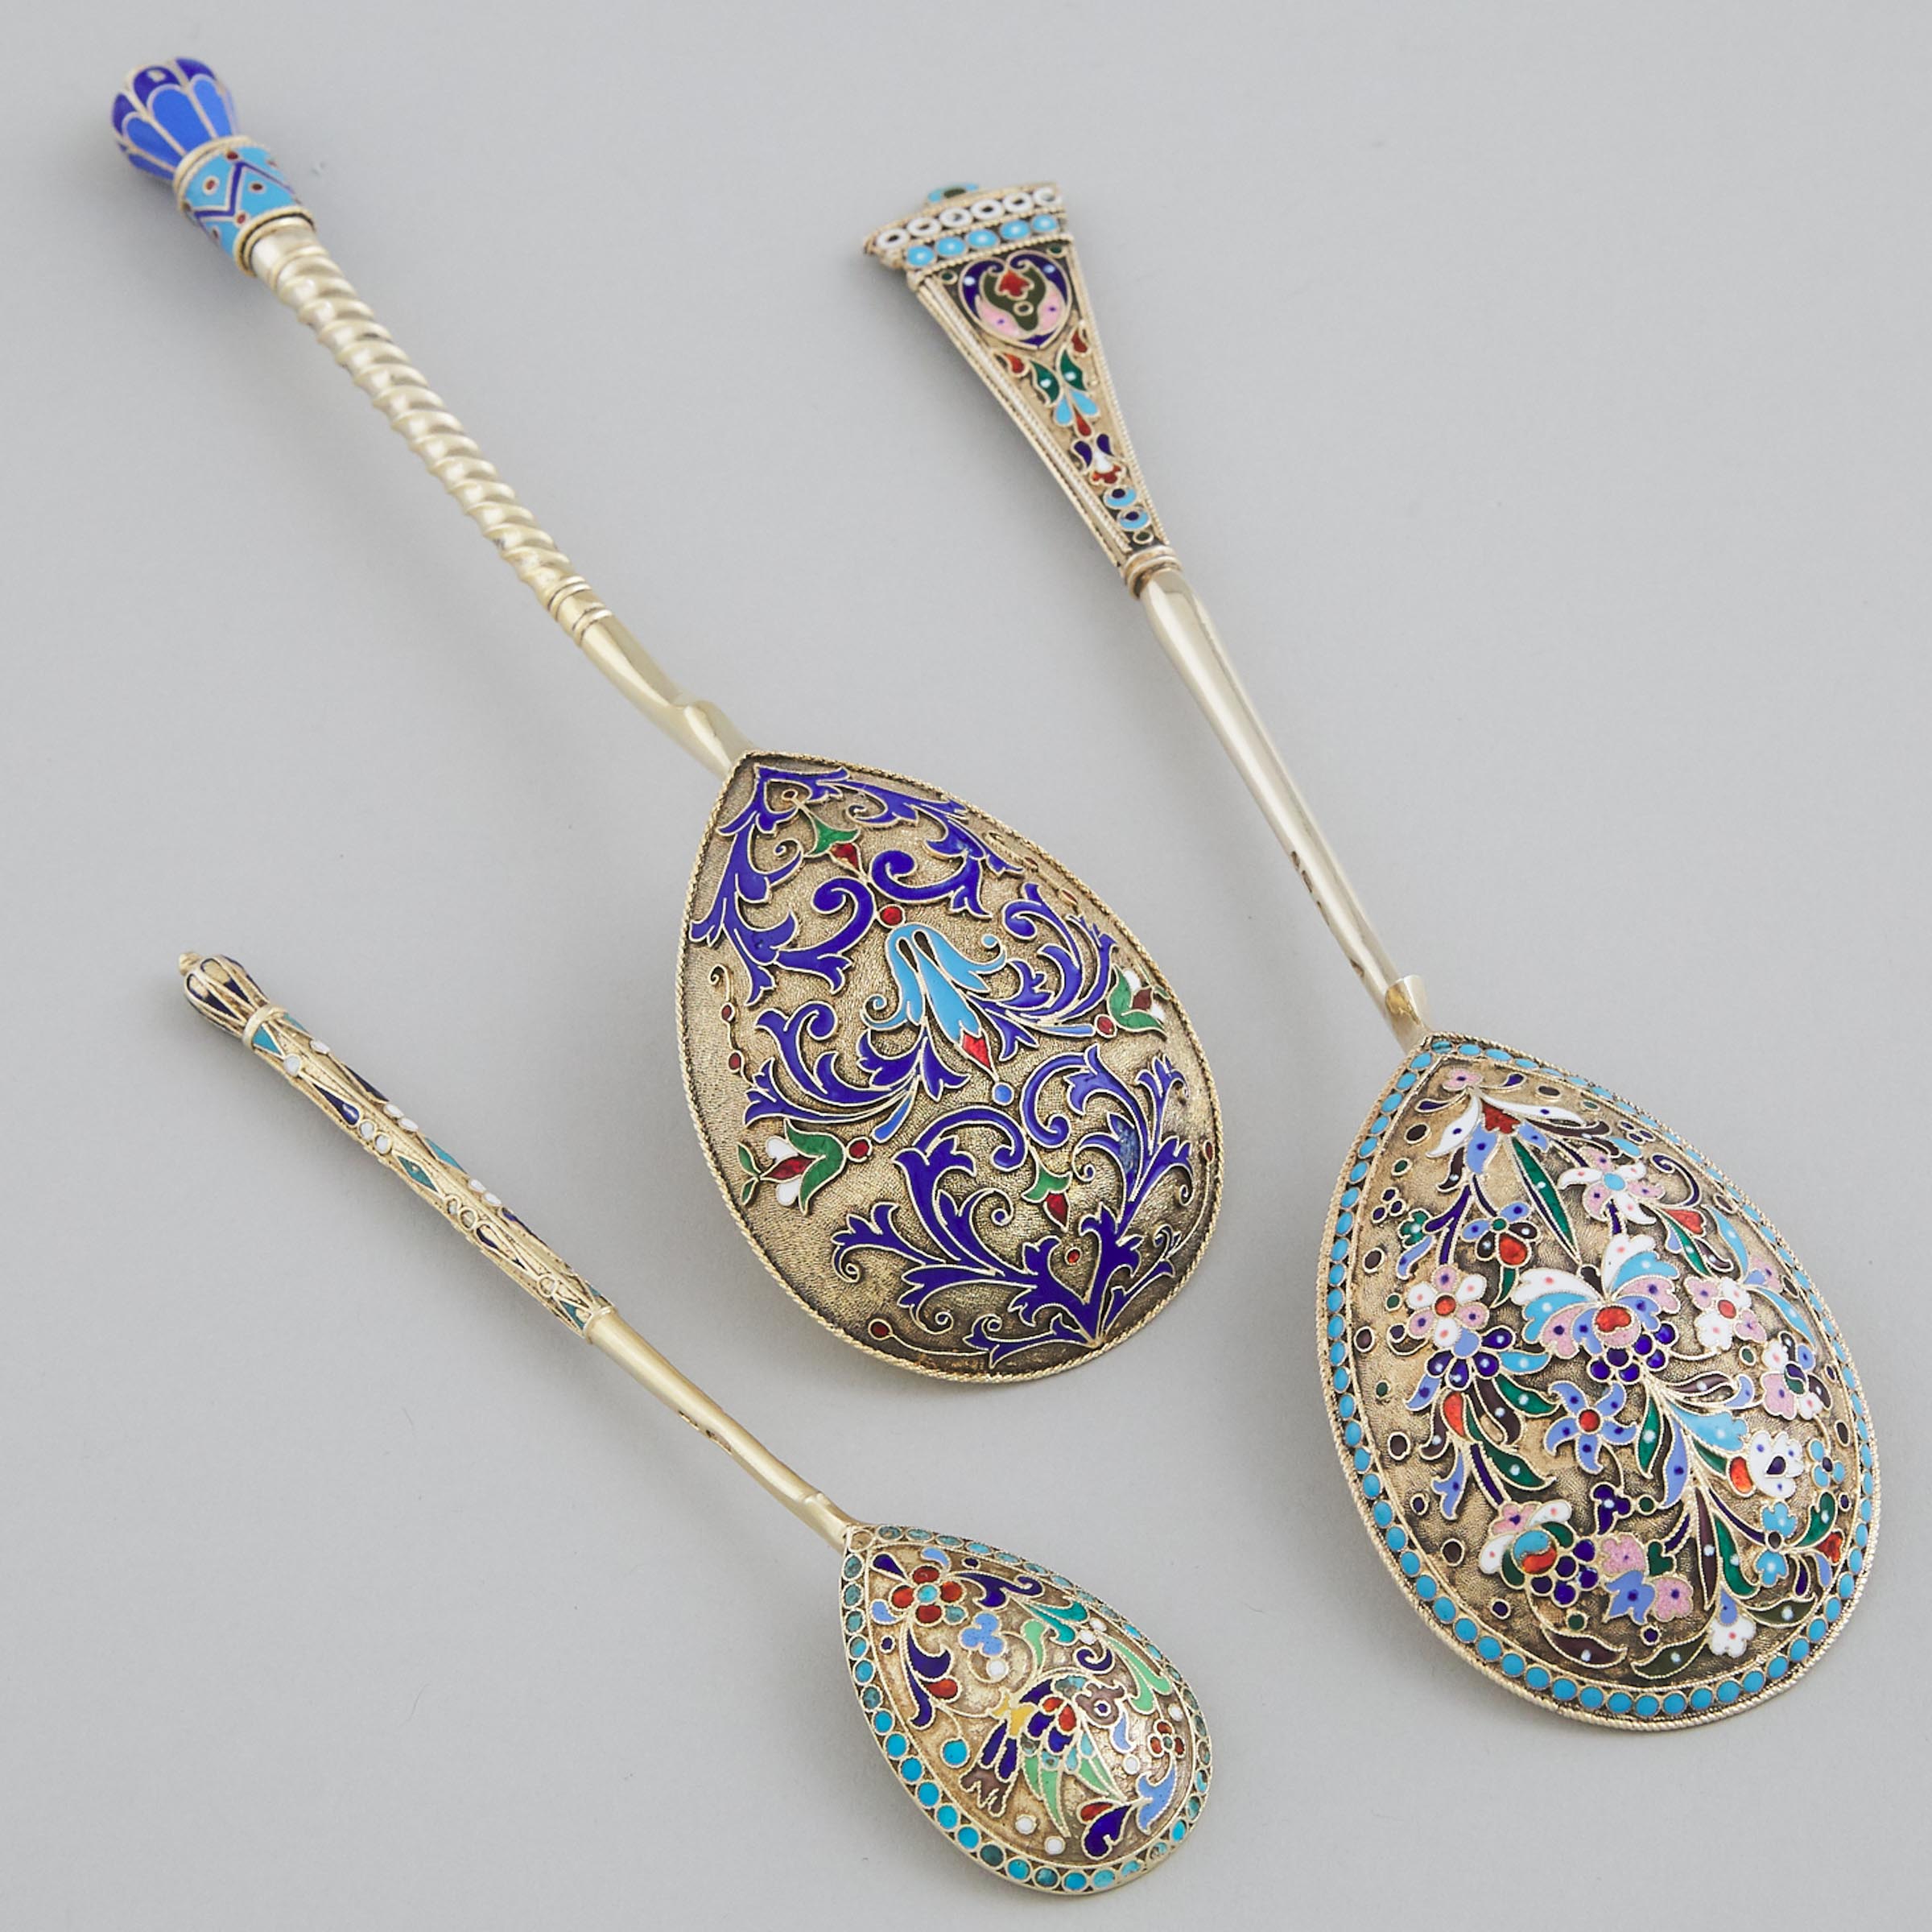 Three Russian Silver-Gilt and Cloisonné Enamel Spoons, Moscow and St. Petersburg, late 19th/early 20th century